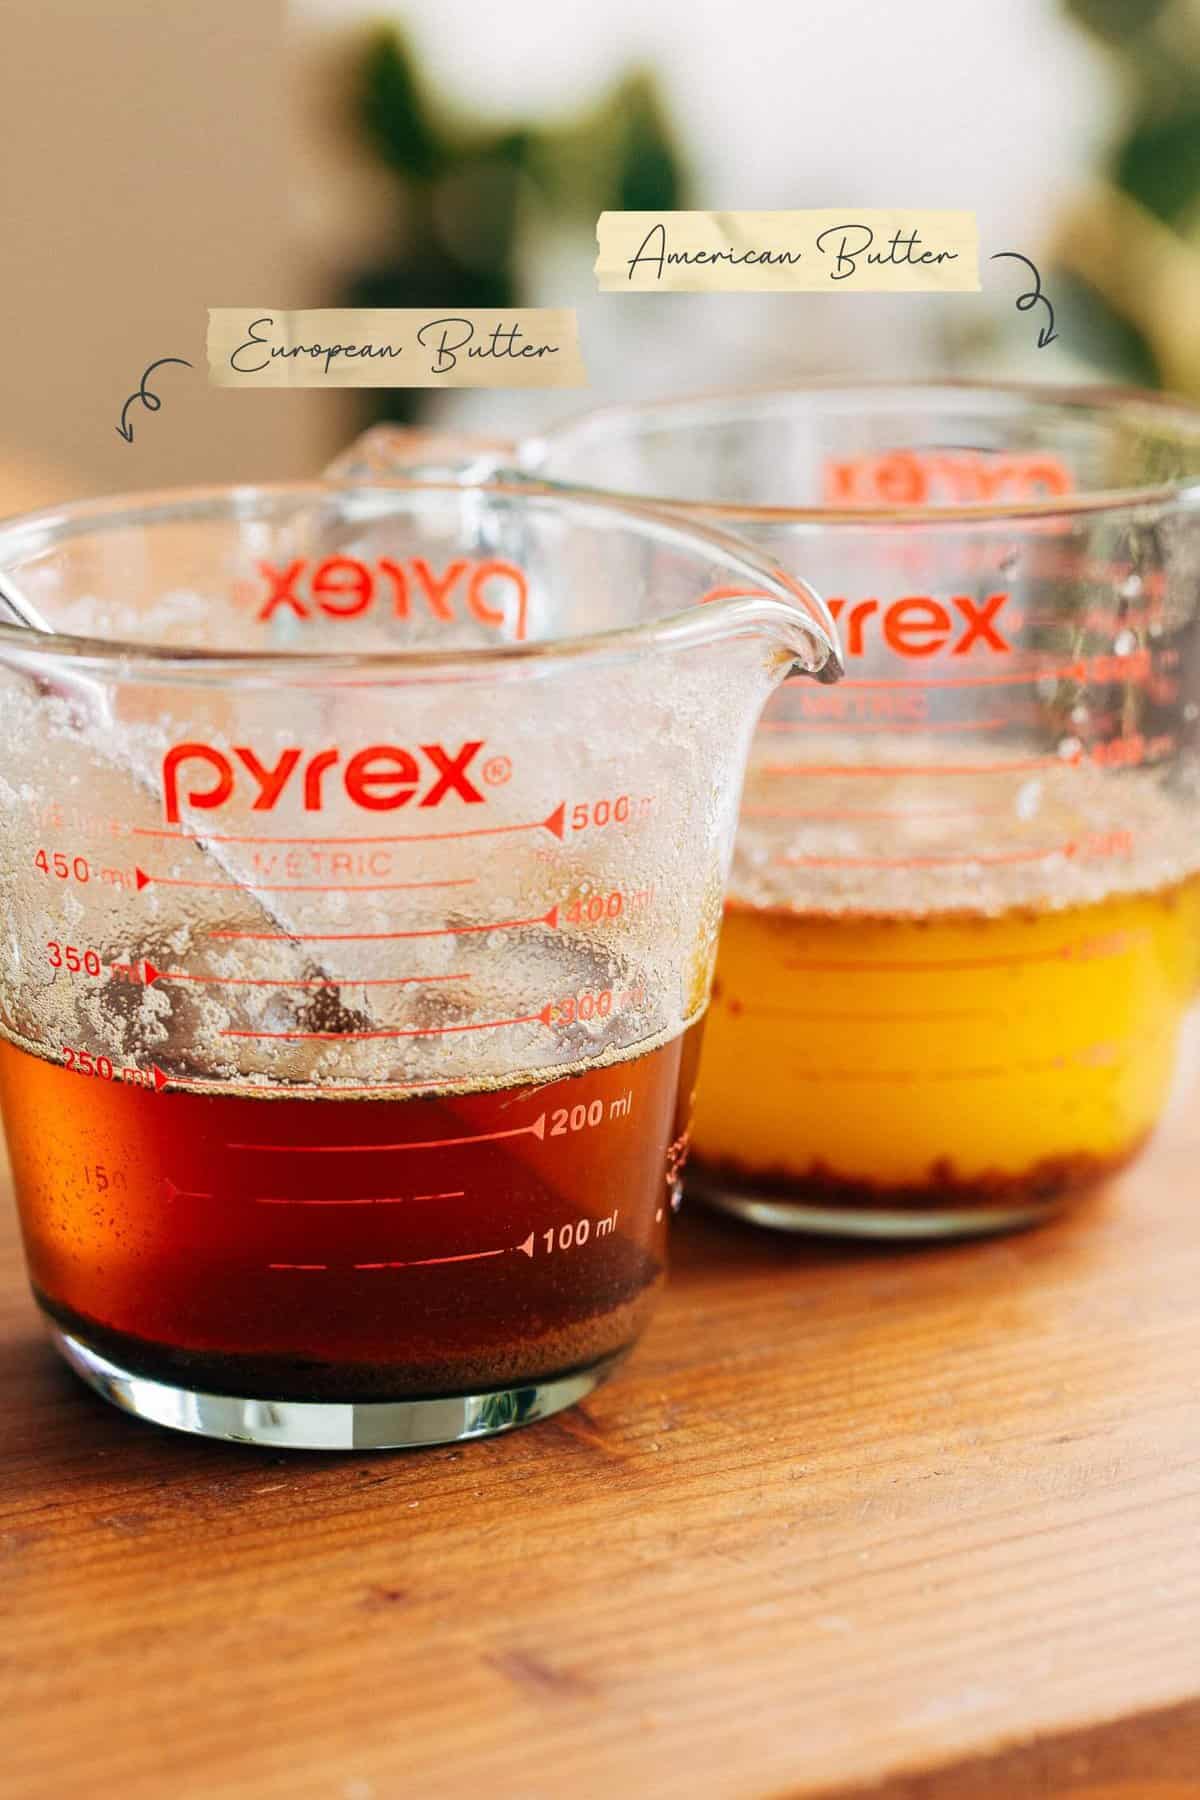 glass pyrex measuring cup containing melted european butter next to another glass pyrex measuring cup containing melted american butter